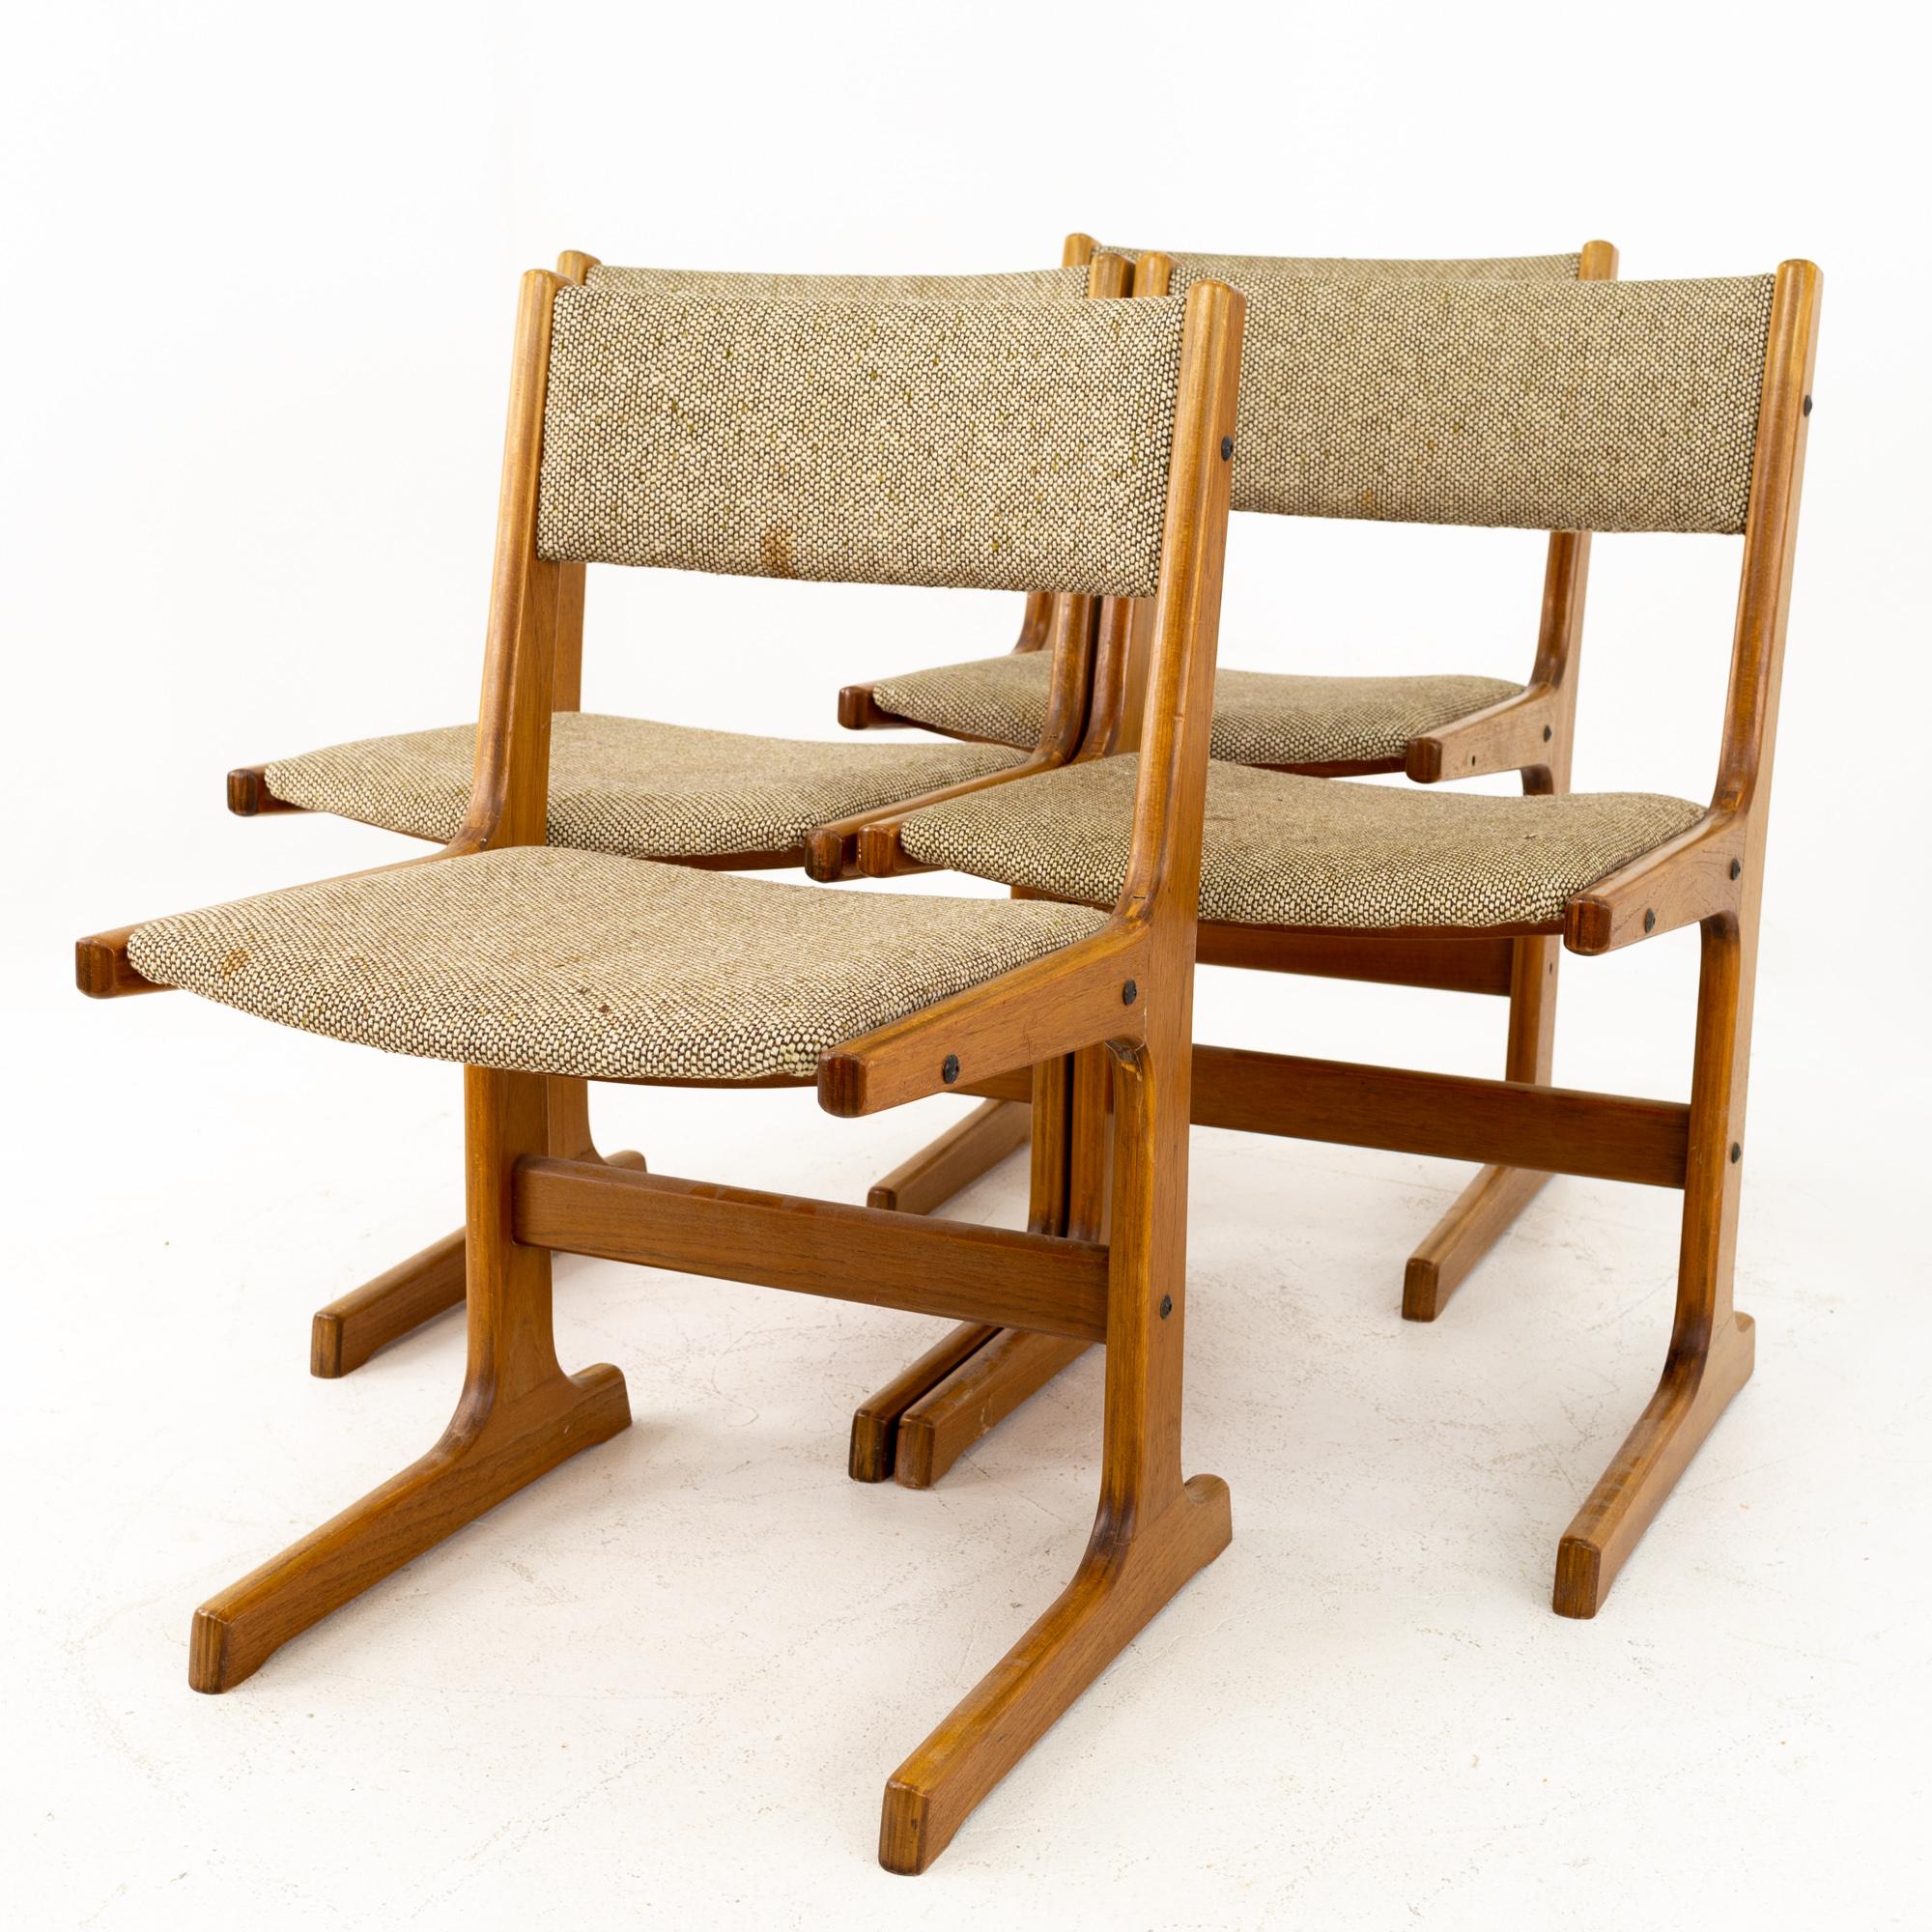 Gangso Mobler style mid century teak dining chairs - Set of 4
These chairs are 19 wide x 18 deep x 31 inches high

All pieces of furniture can be had in what we call restored vintage condition. That means the piece is restored upon purchase so